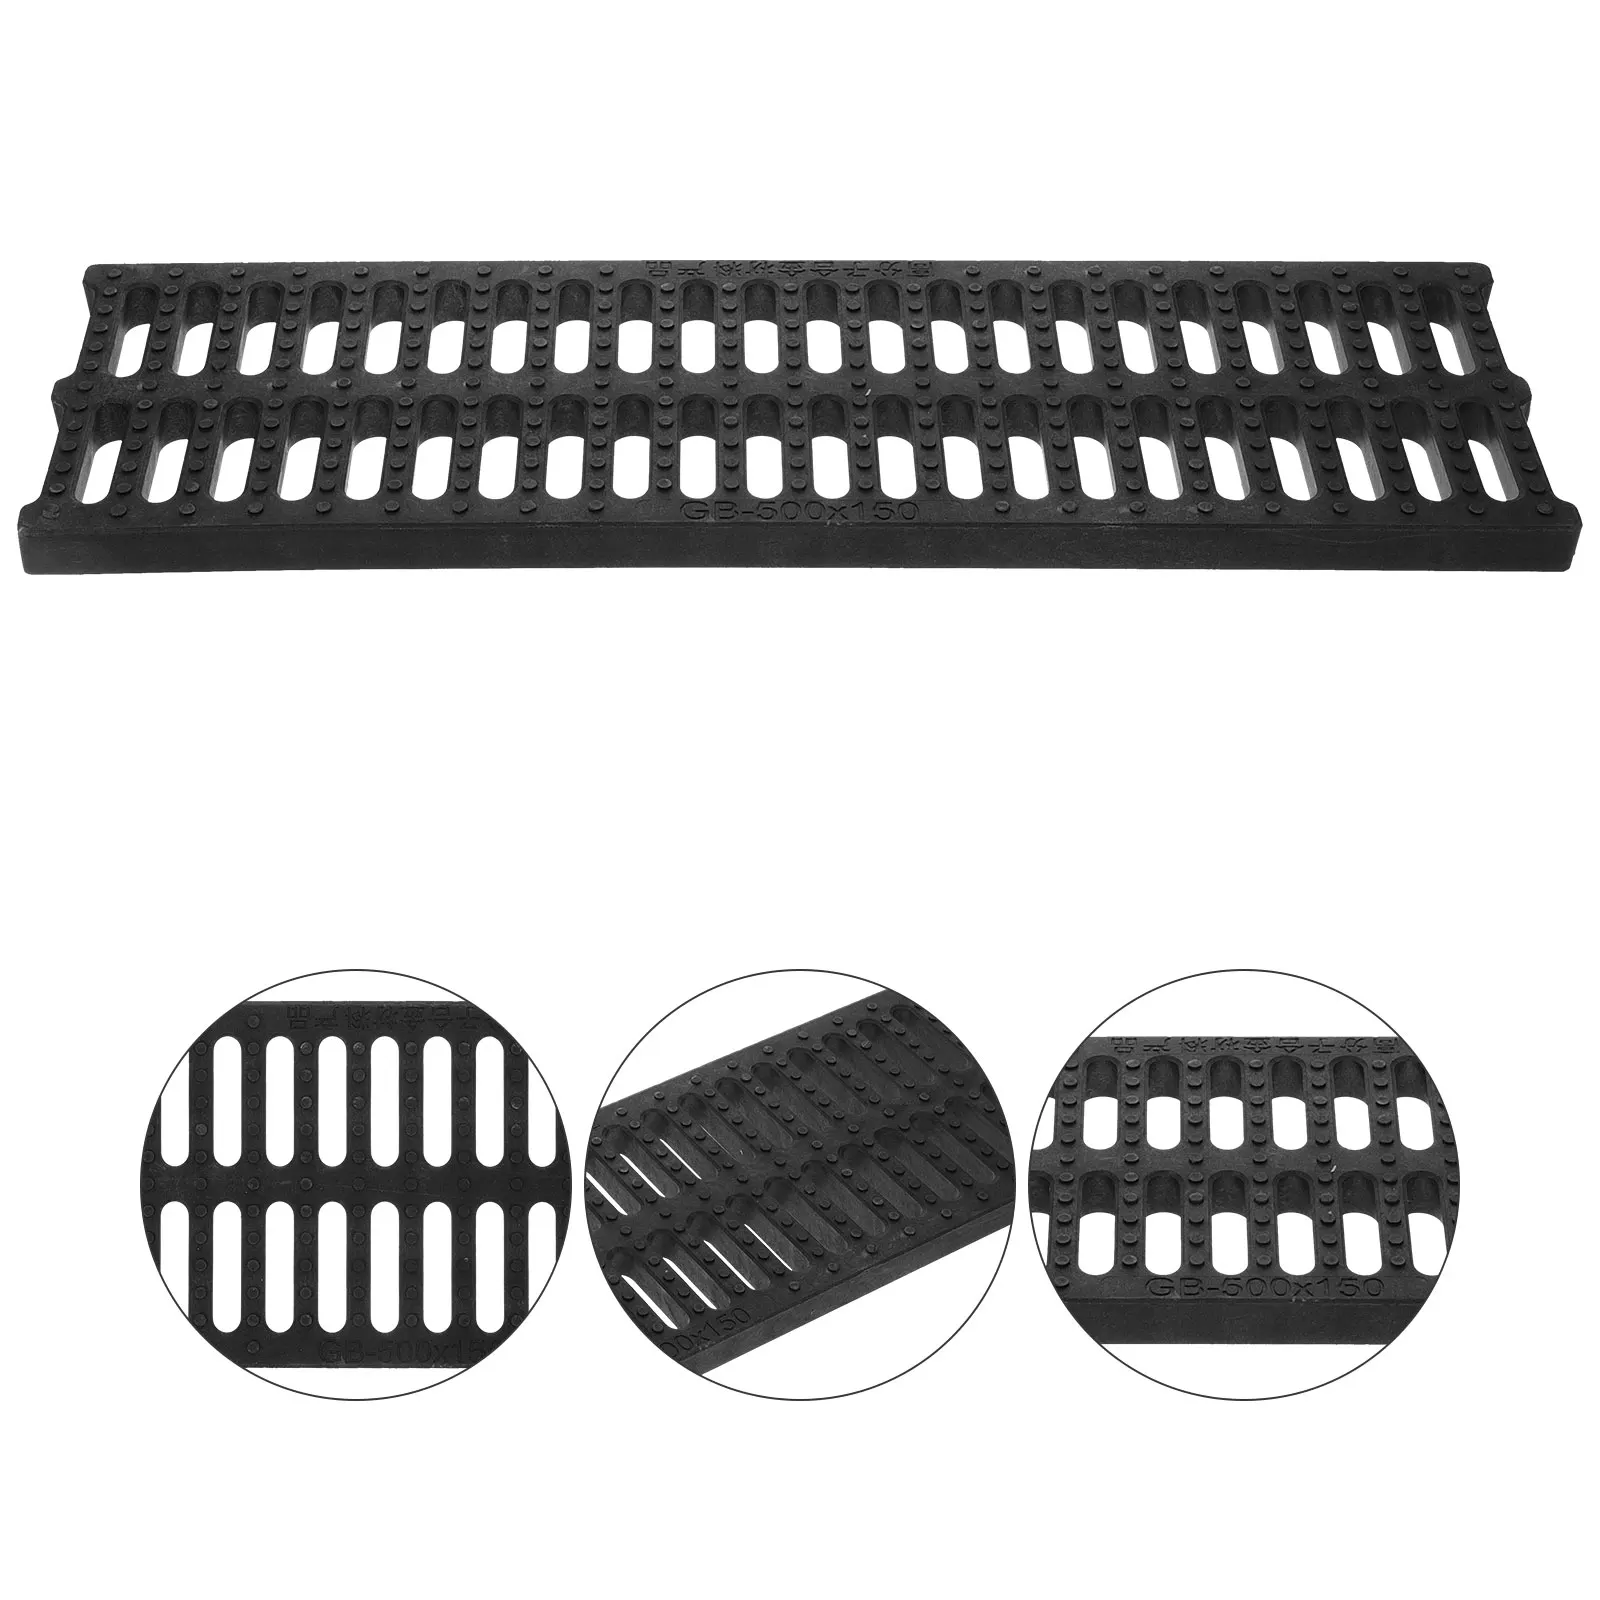 

Sewer Drain Grate Outdoor Drainage Grate Plastic Sewer Rainwater Well Rectangular Sewer Cover Channel Grid Grate Channel Patio